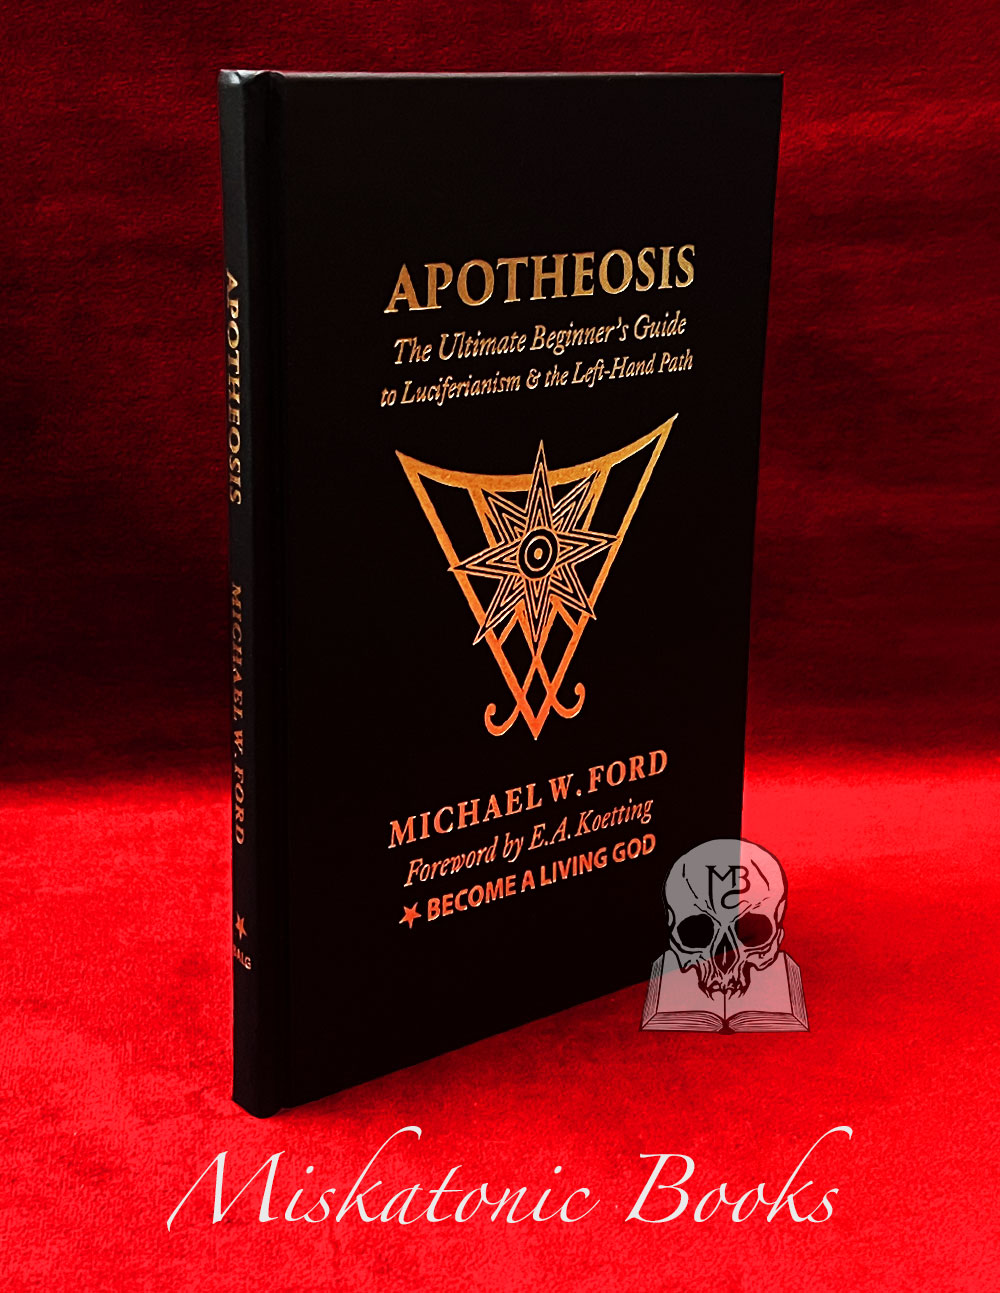 APOTHEOSIS: The Ultimate Beginner’s Guide To Luciferianism & The Left-Hand Path by Michael W. Ford - Hardcover Edition